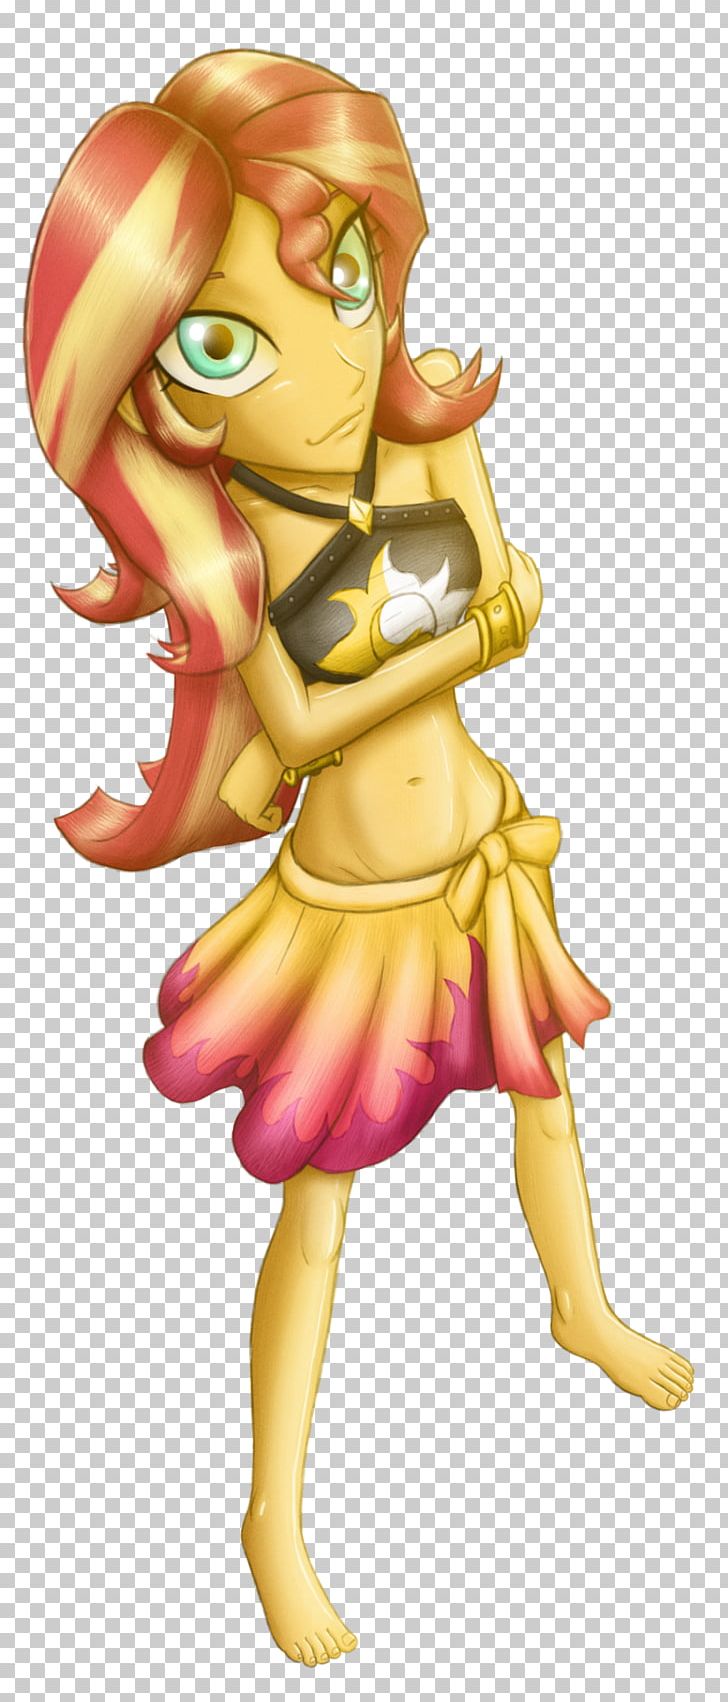 Sunset Shimmer Fluttershy My Little Pony: Equestria Girls Cycles Render PNG, Clipart, Art, Brown Hair, Cartoon, Deviantart, Equestria Free PNG Download